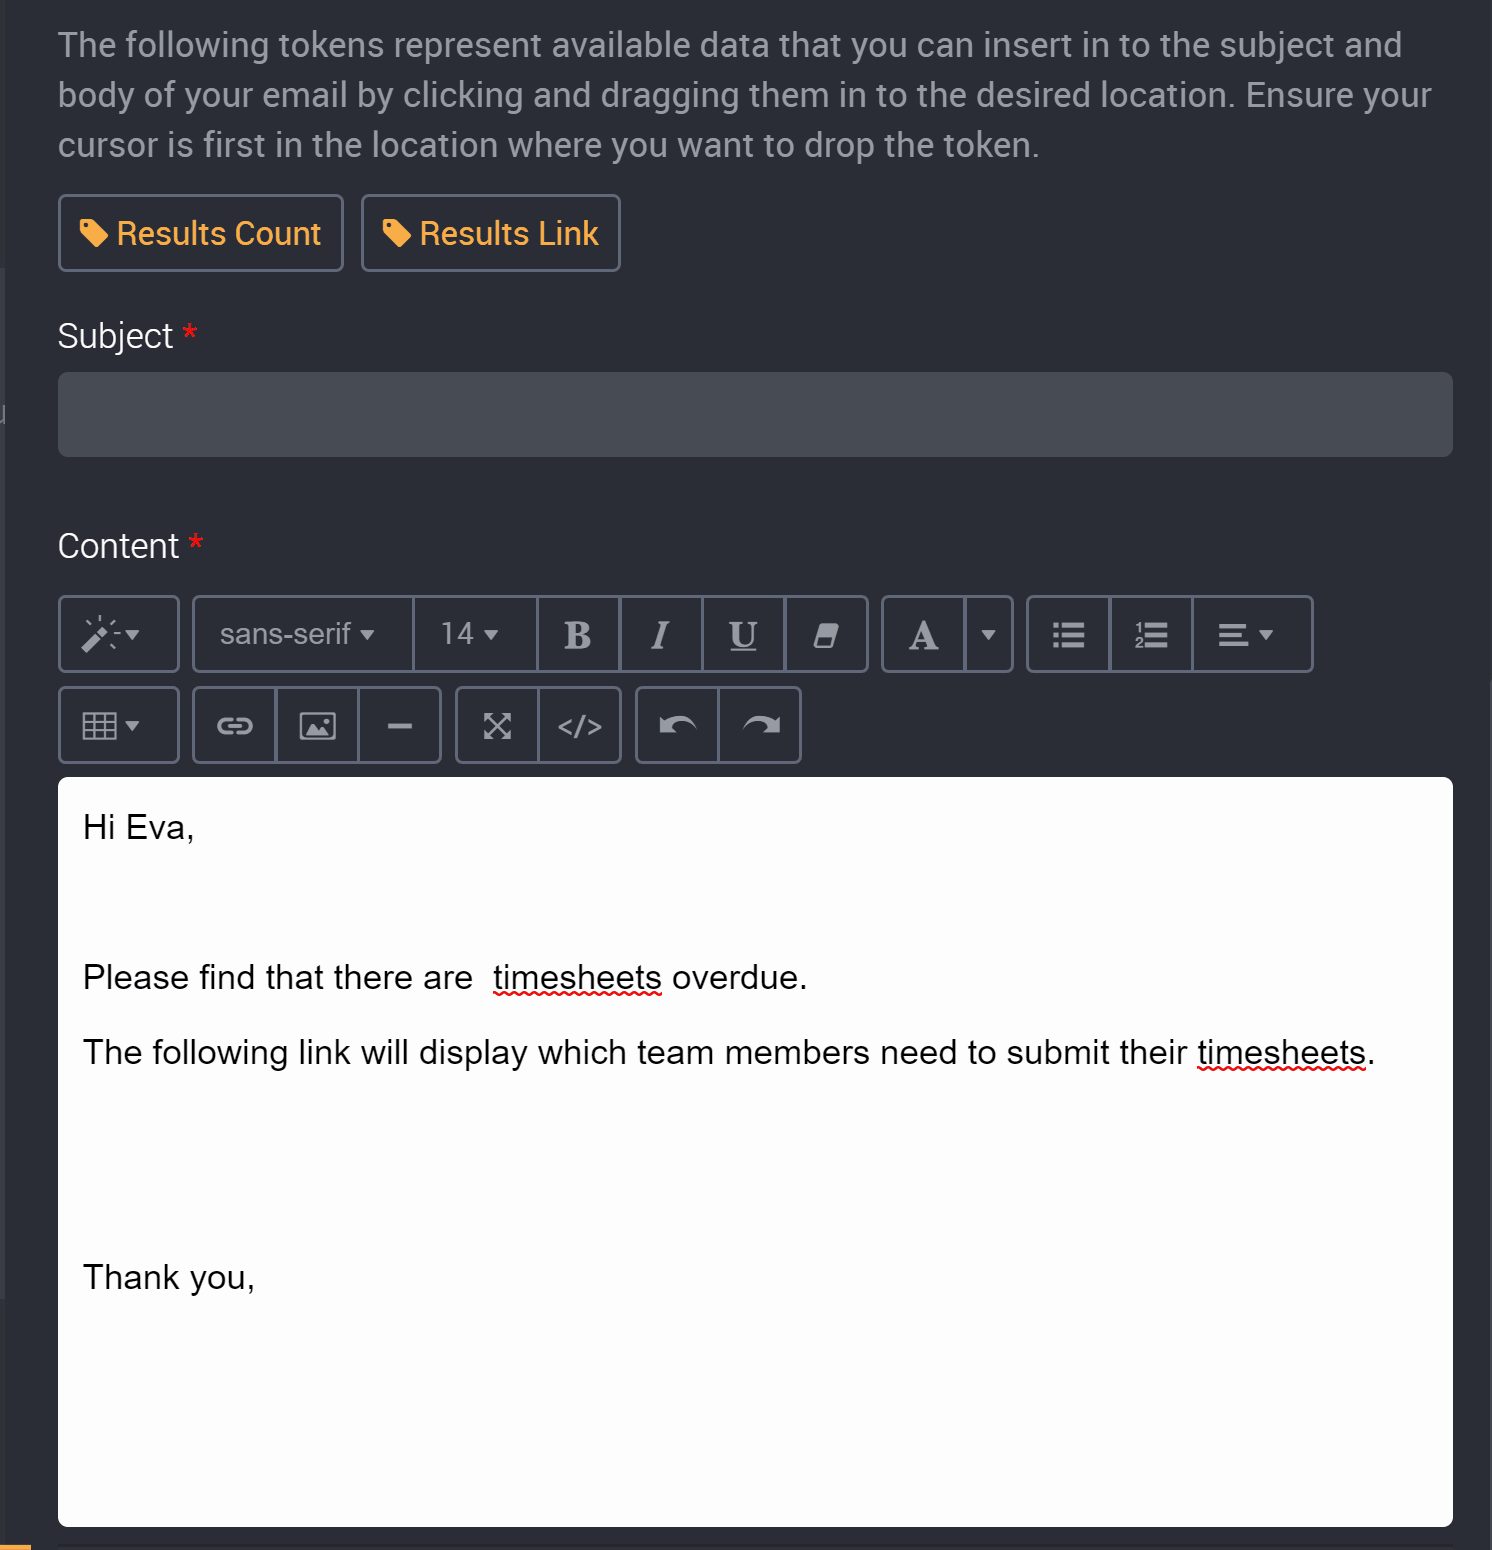 How to add tokens to emails